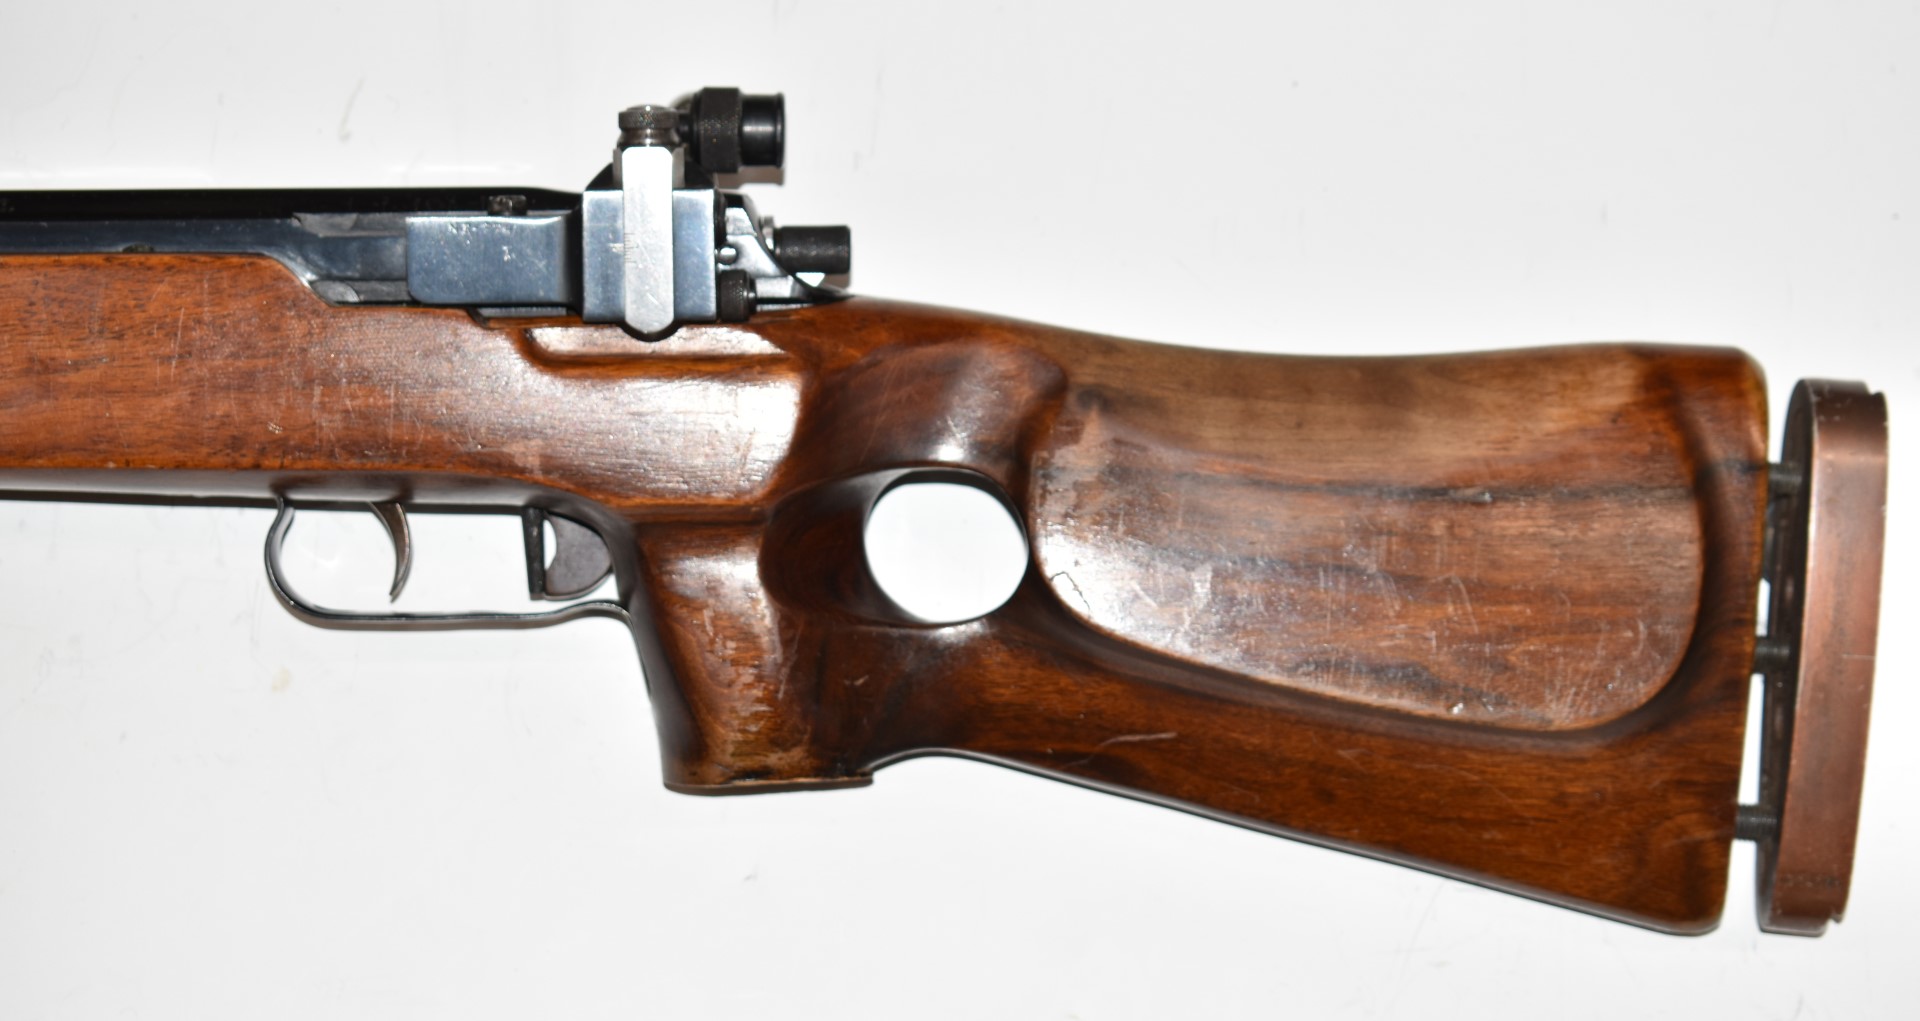 Vostok MU-12 .22 bolt-action target rifle with thumb hole grip, chequered forend, raised cheek - Image 8 of 15